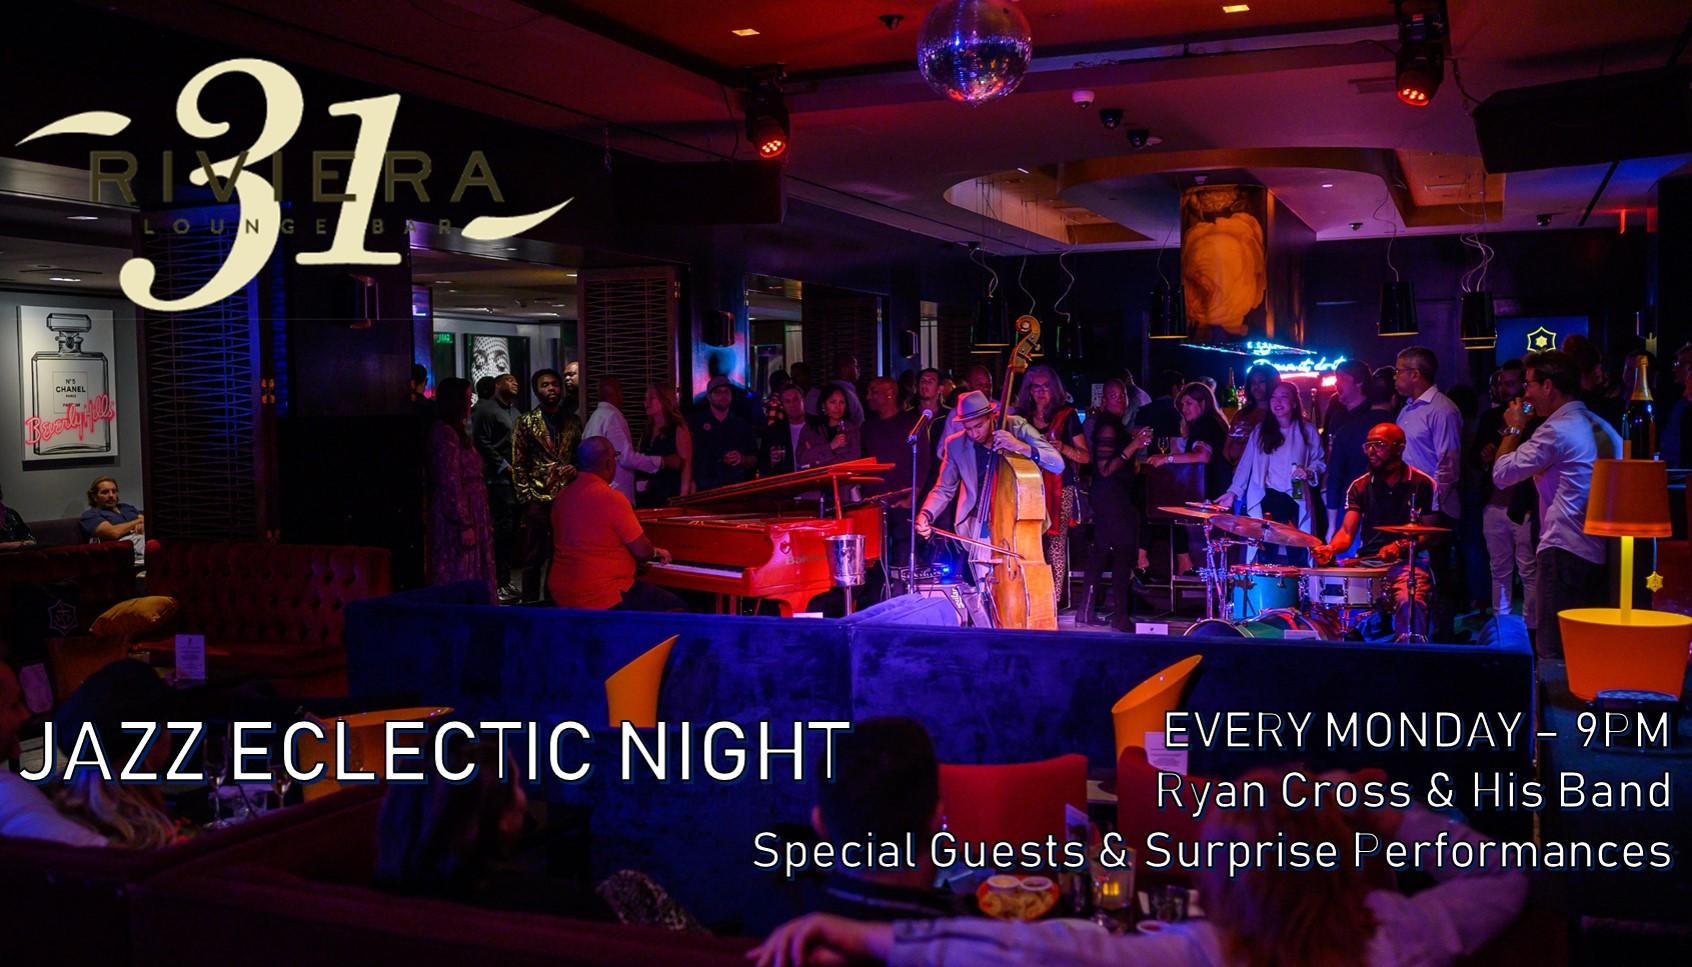 Jazz Eclectic Night at Riviera 31